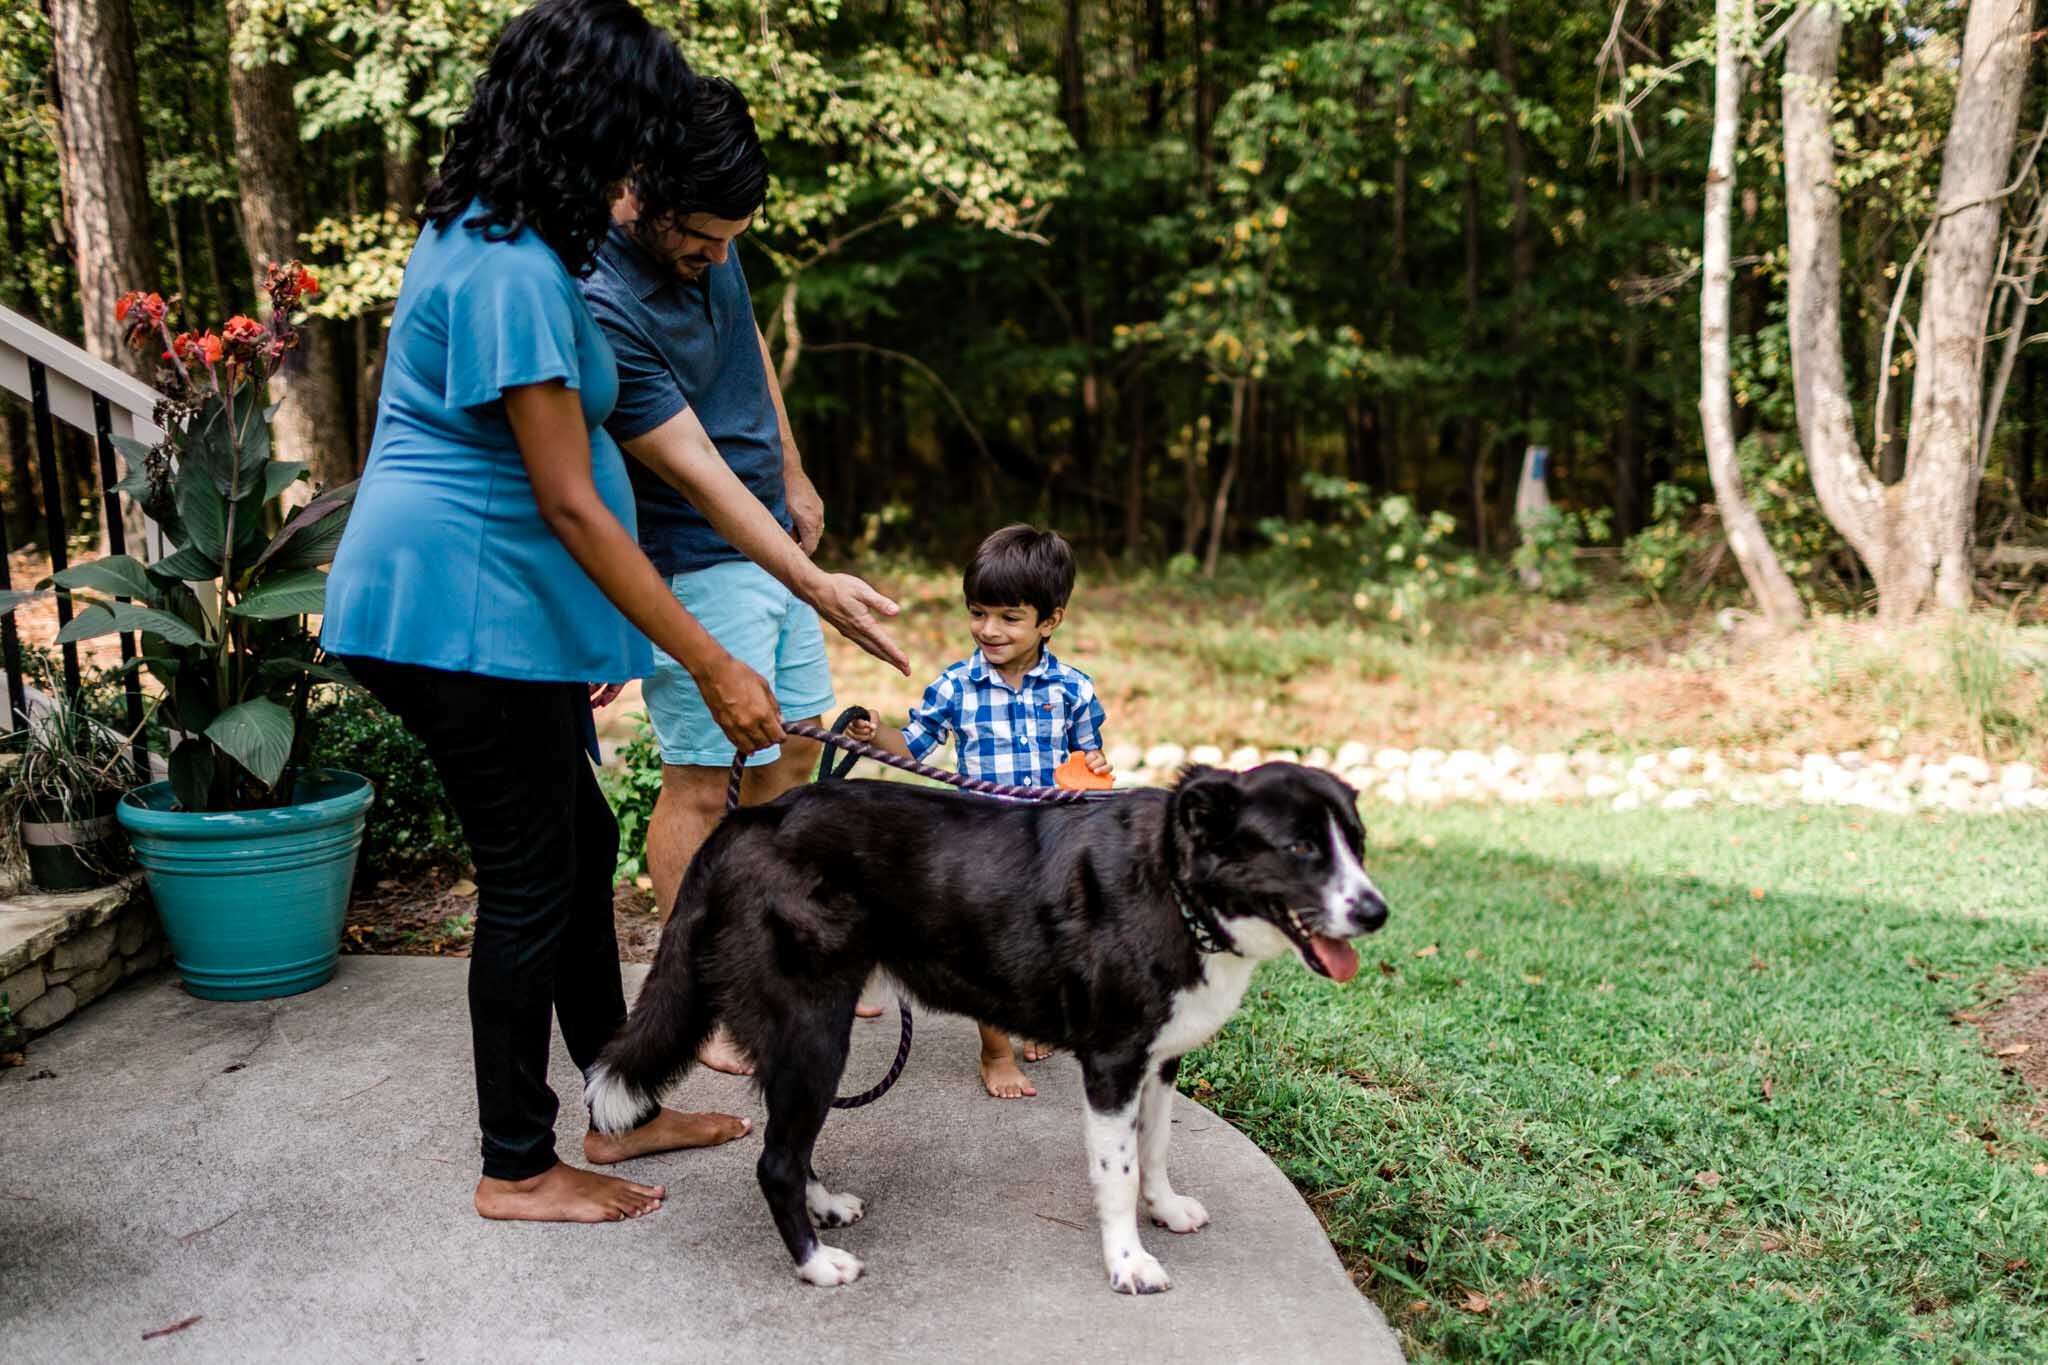 Durham Photographer | By G. LIn Photography | Family outside with dog and laughing